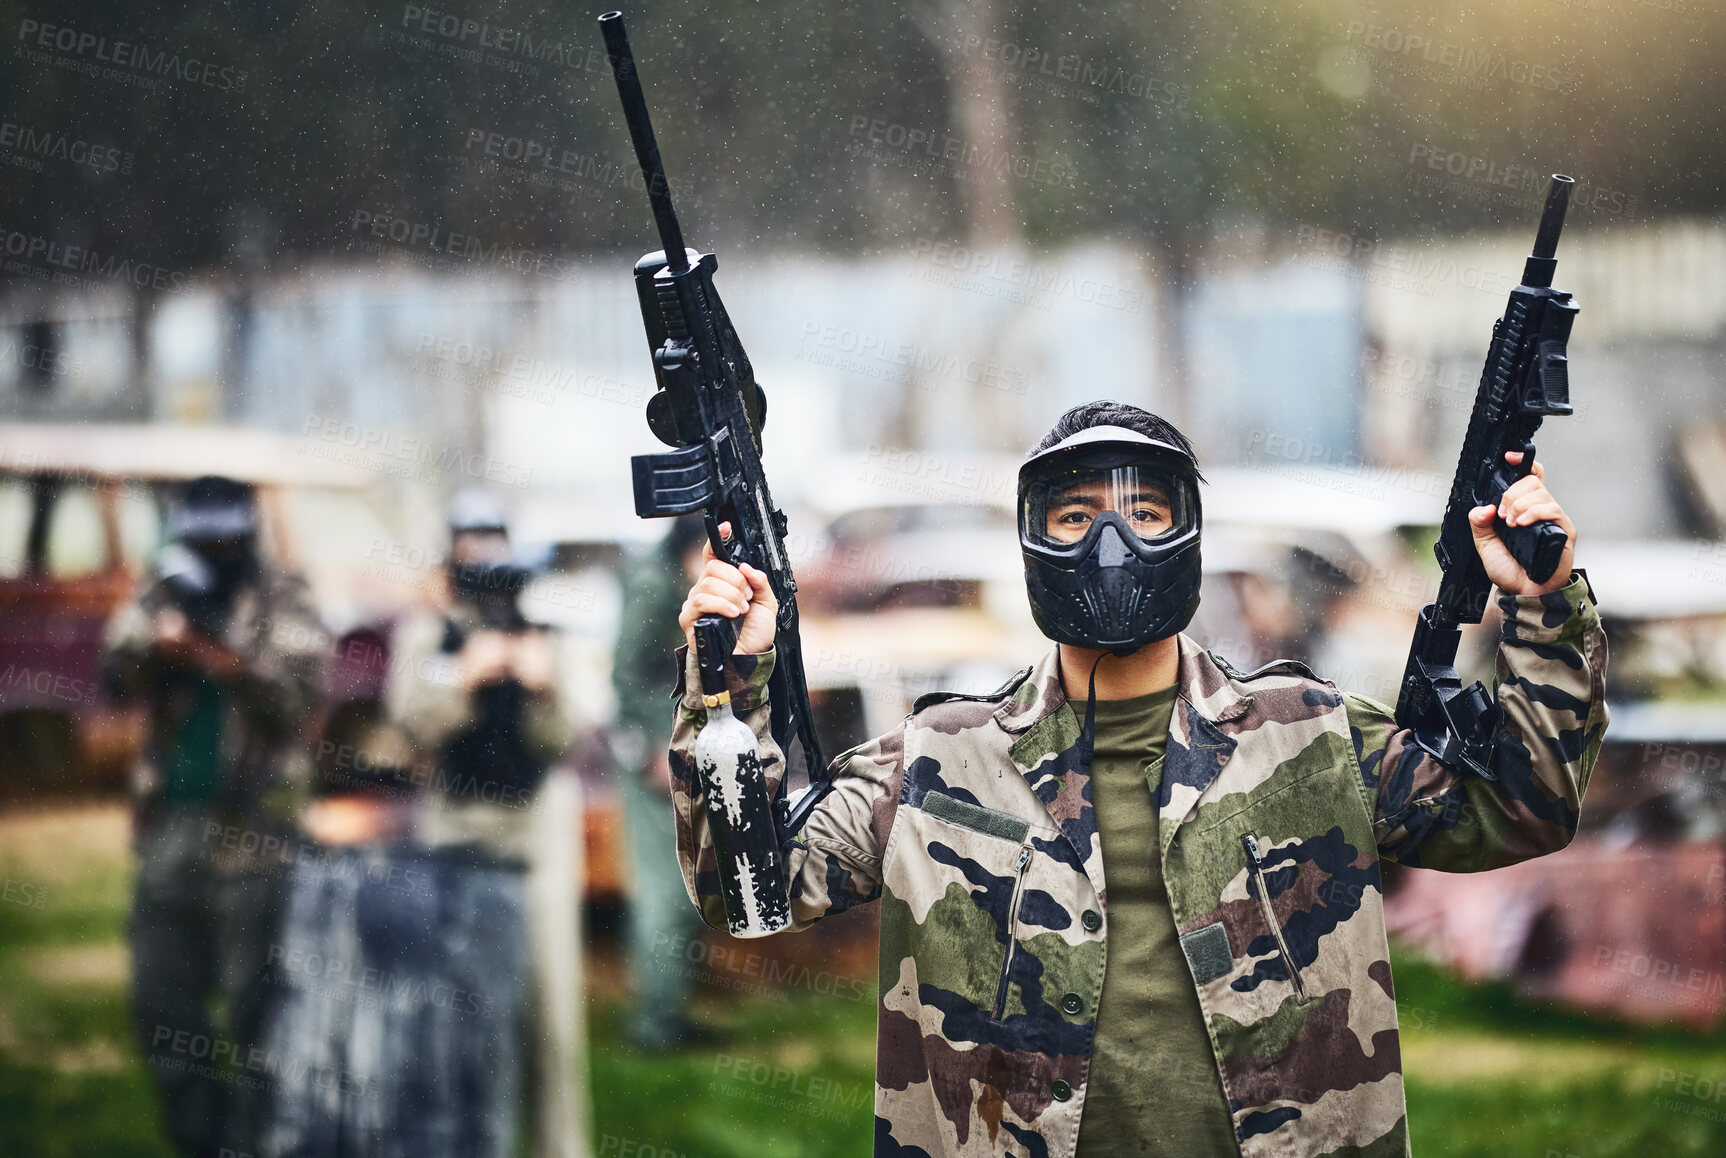 Buy stock photo Paintball, gun or man ready for a shooting game with fast action on a fun battlefield on holiday. Mission, man or player with military weapons gear for survival in an outdoor competition playground